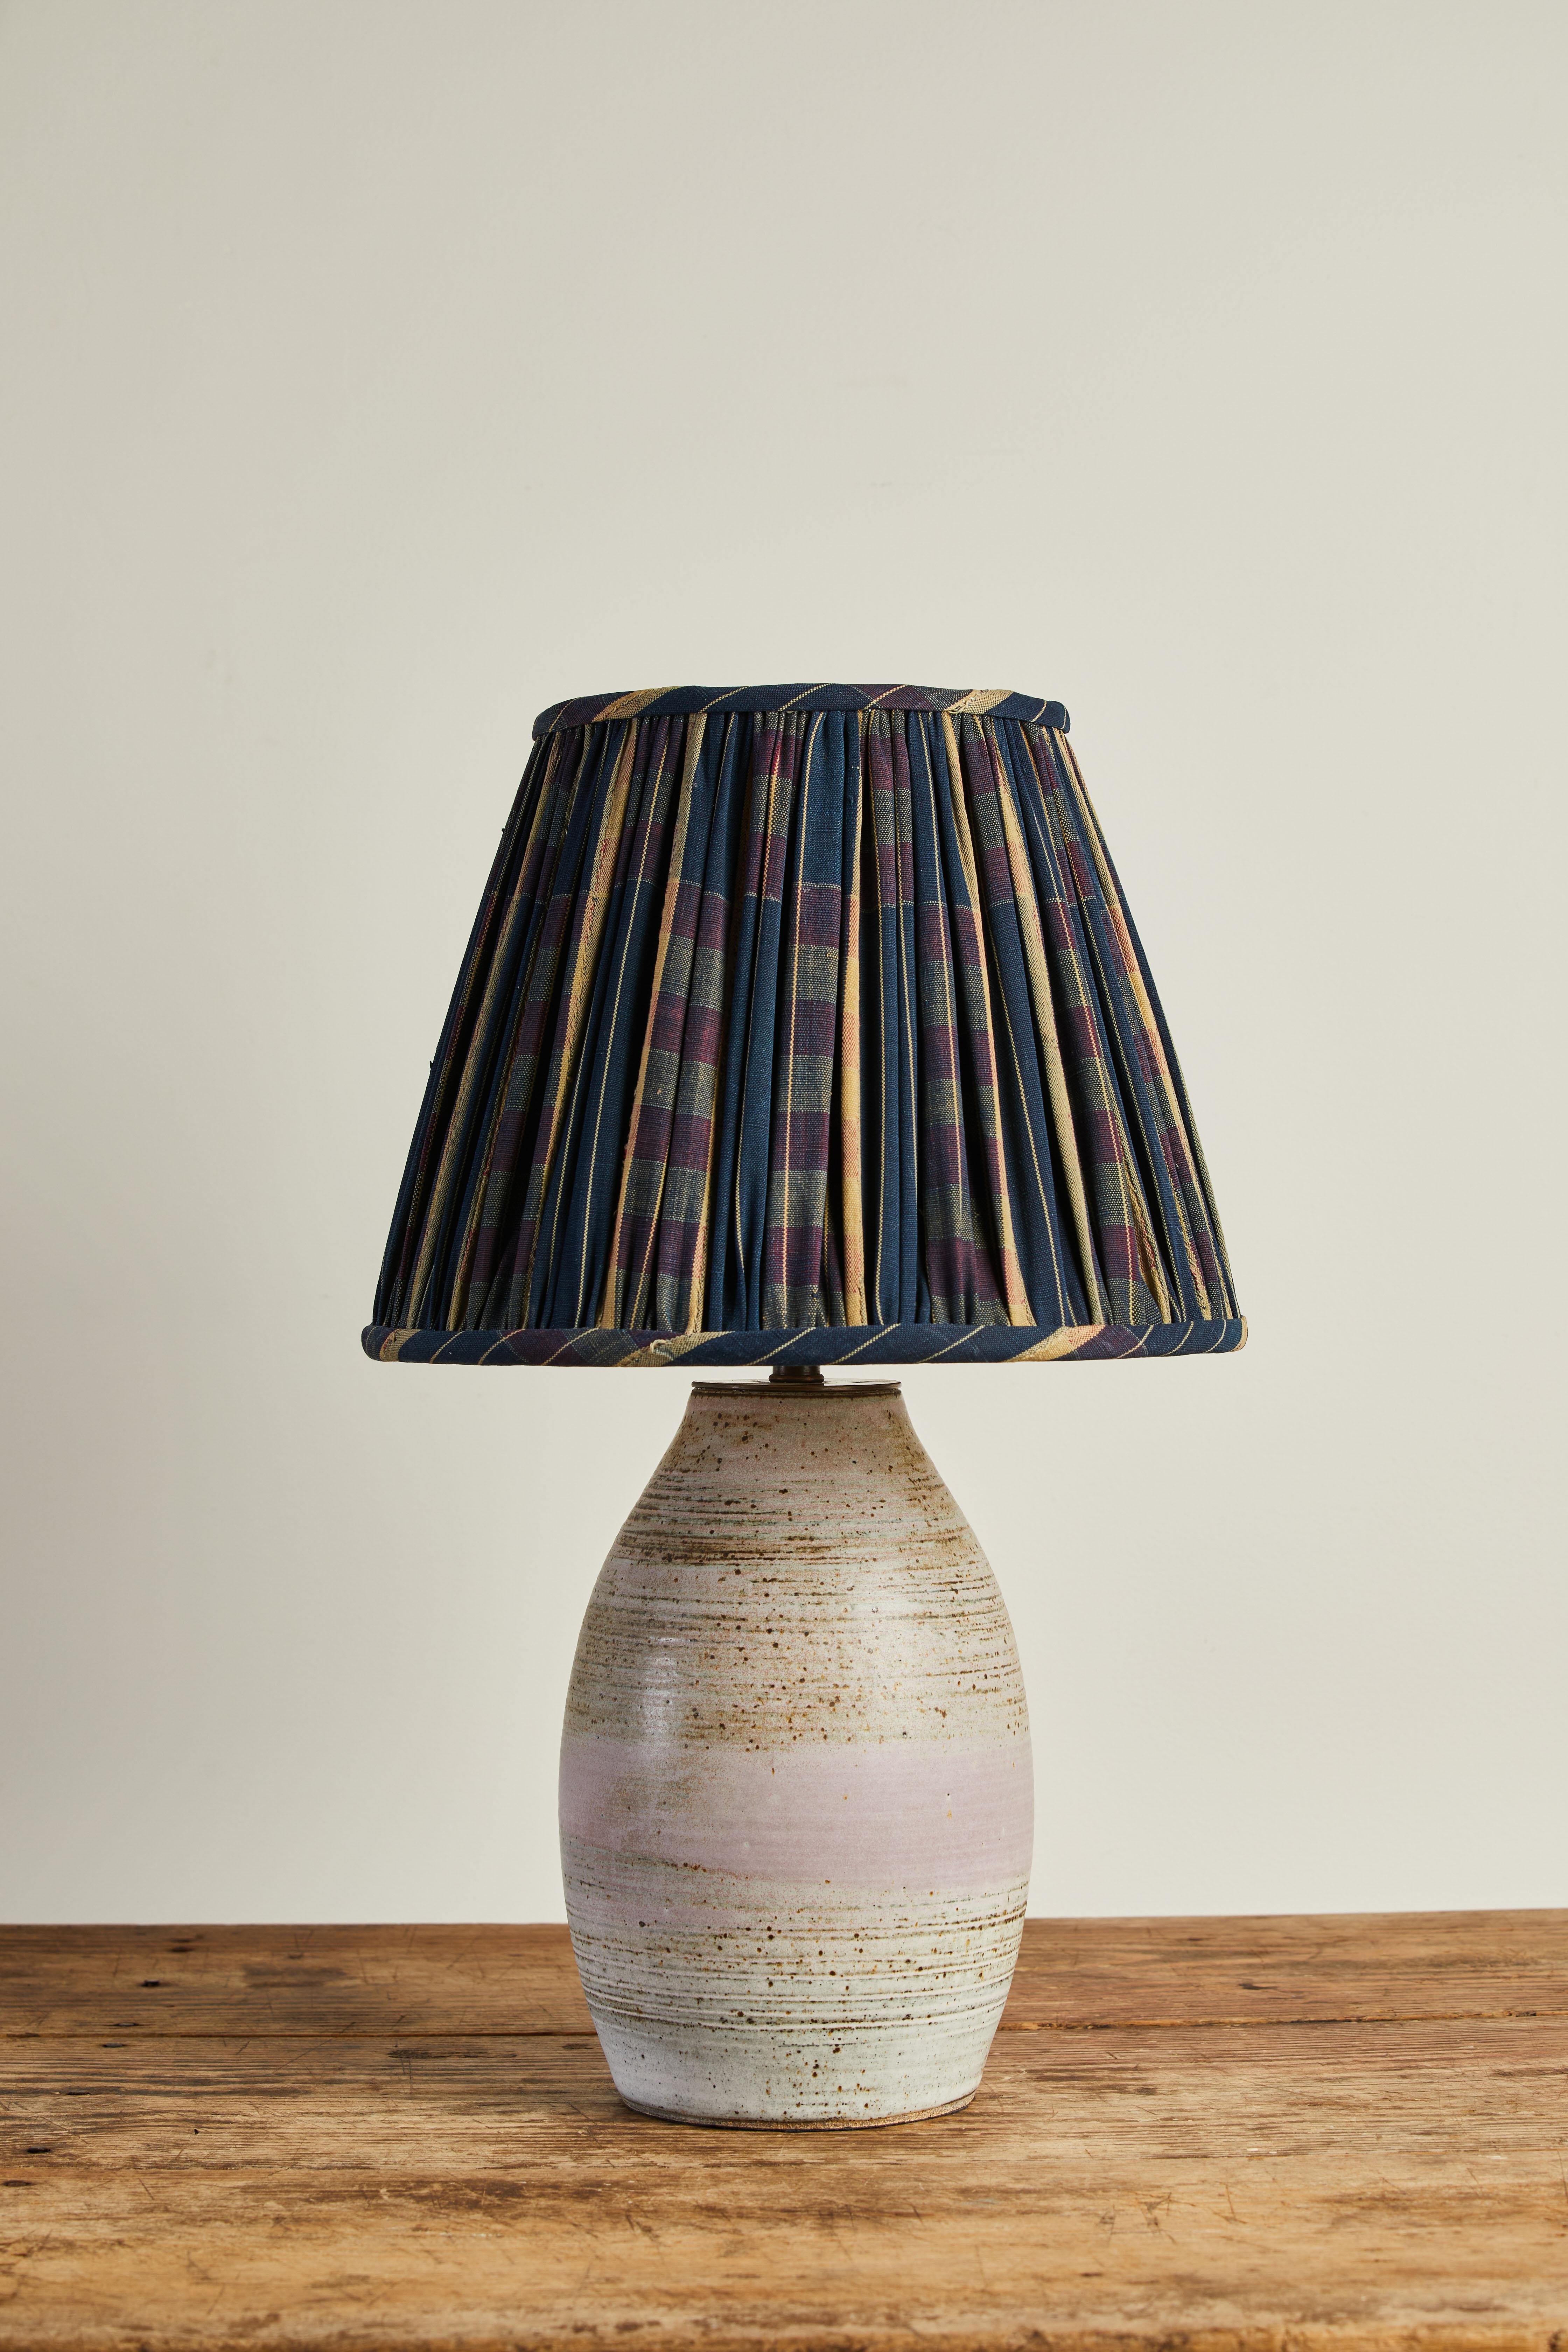 Sophia Studio white glazed ceramic table lamp with custom shirred blue and white lampshade made from vintage African fabric.